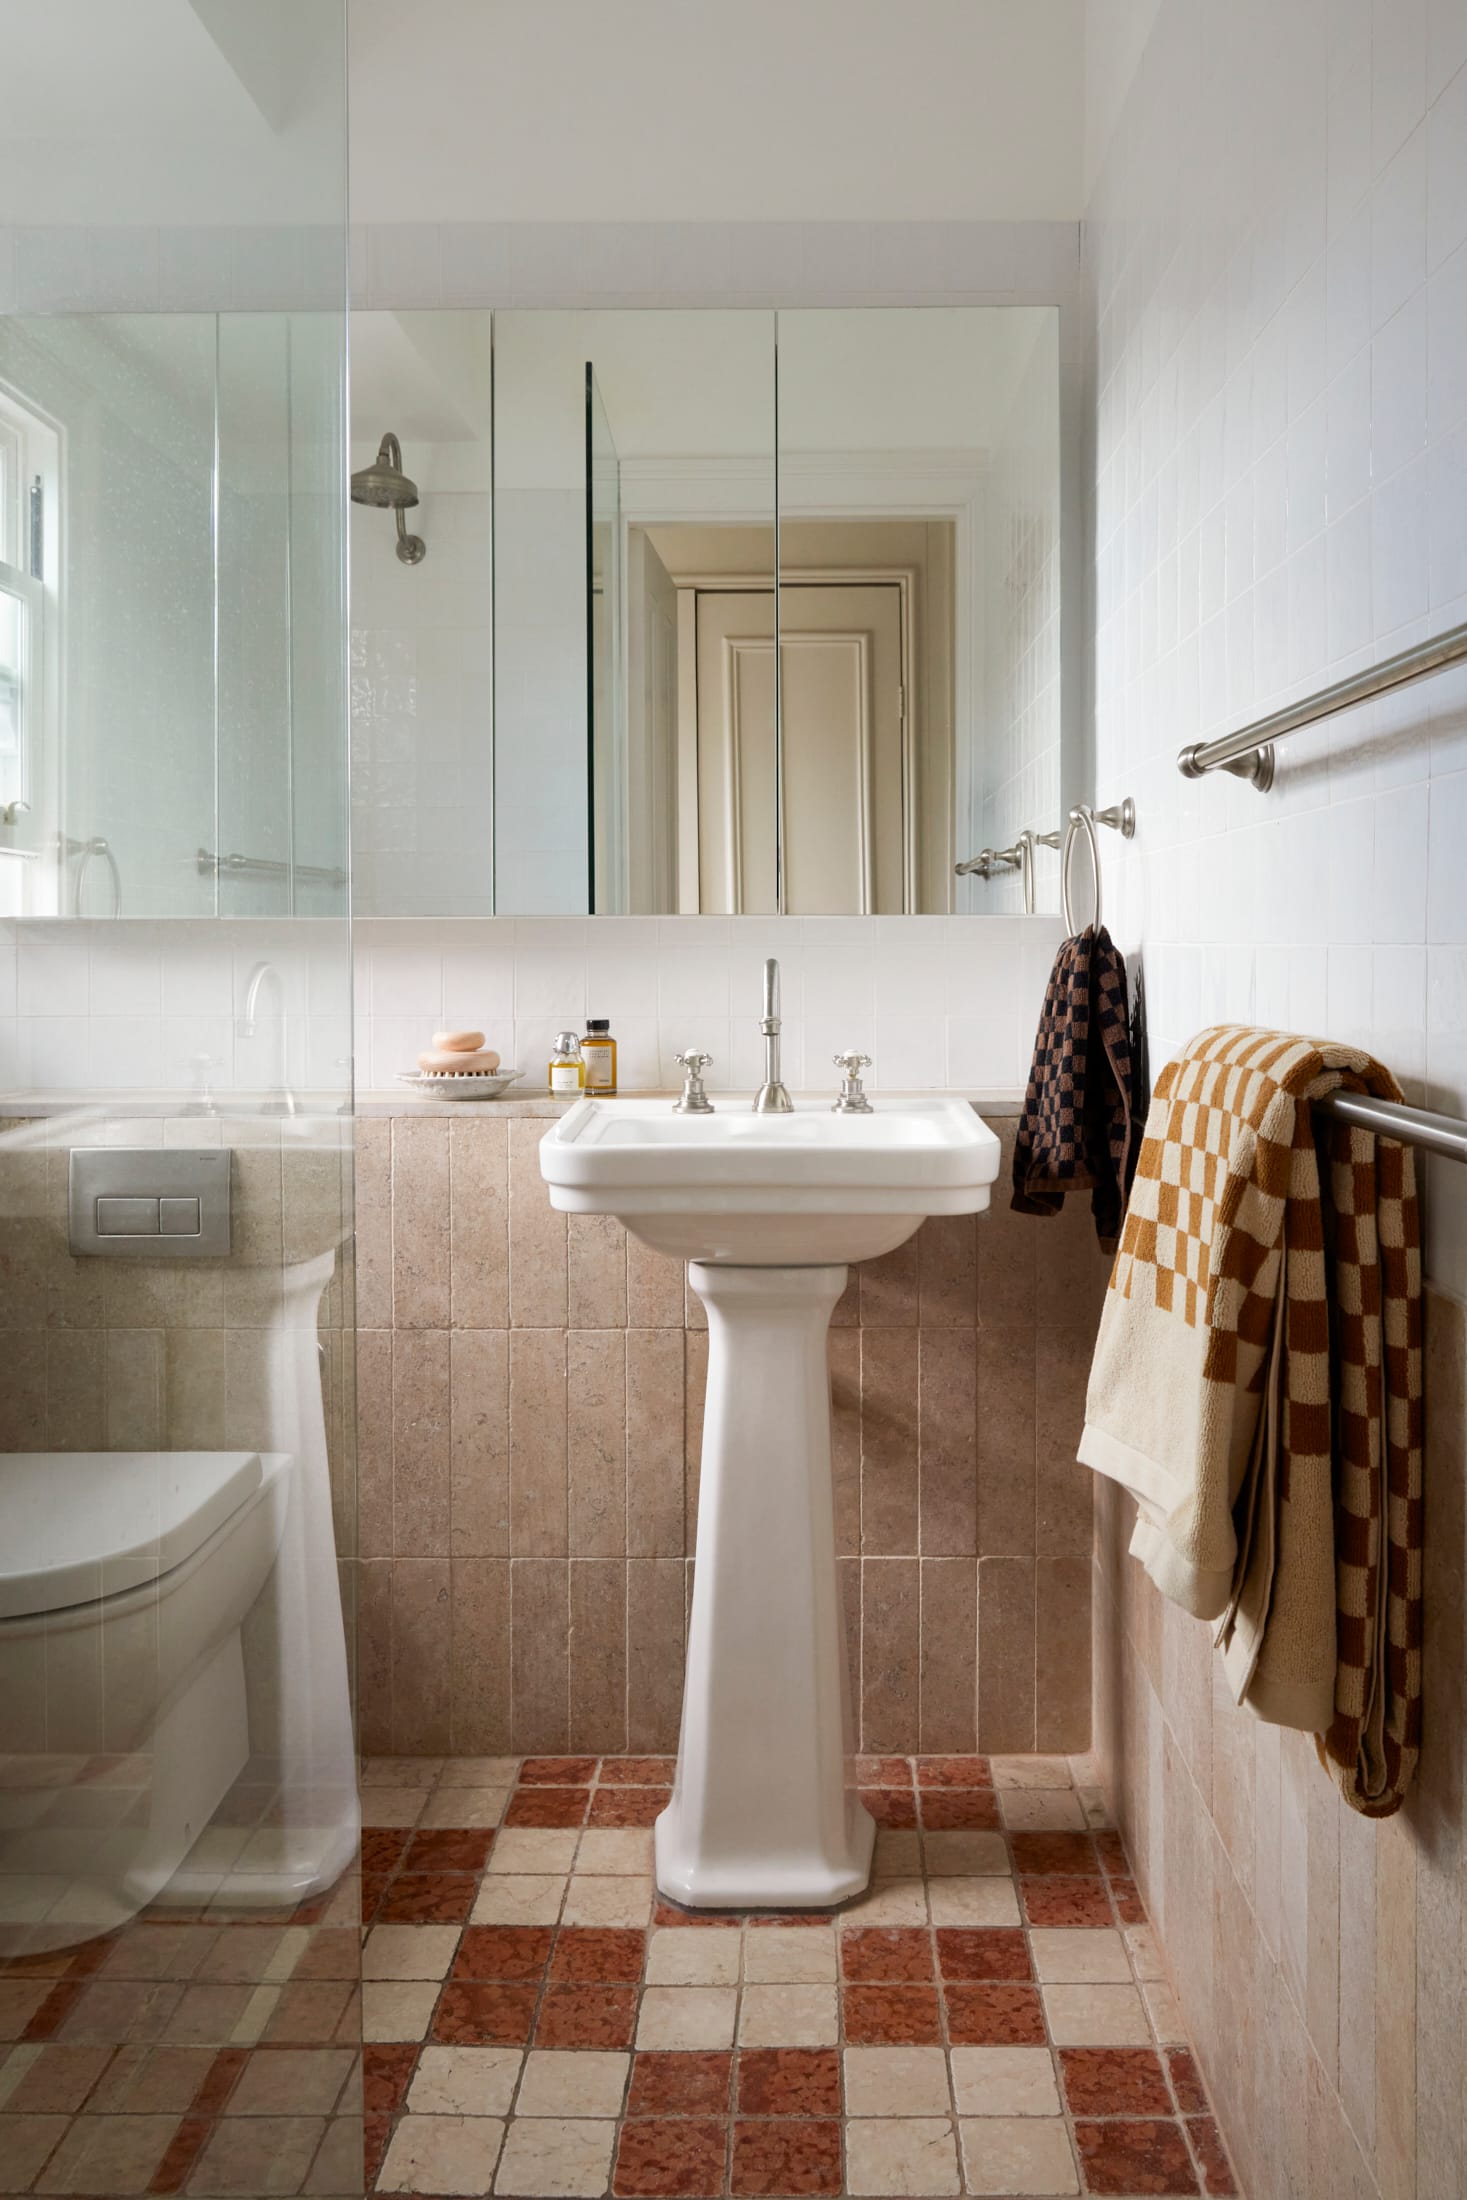 Drummoyne House by studio BARBARA. Photography by Jacqui Turk. Bathroom with heritage stand-alone sink and checkered terracotta and beige travertine floors. Travertine wall tiles and large mirror above sink.